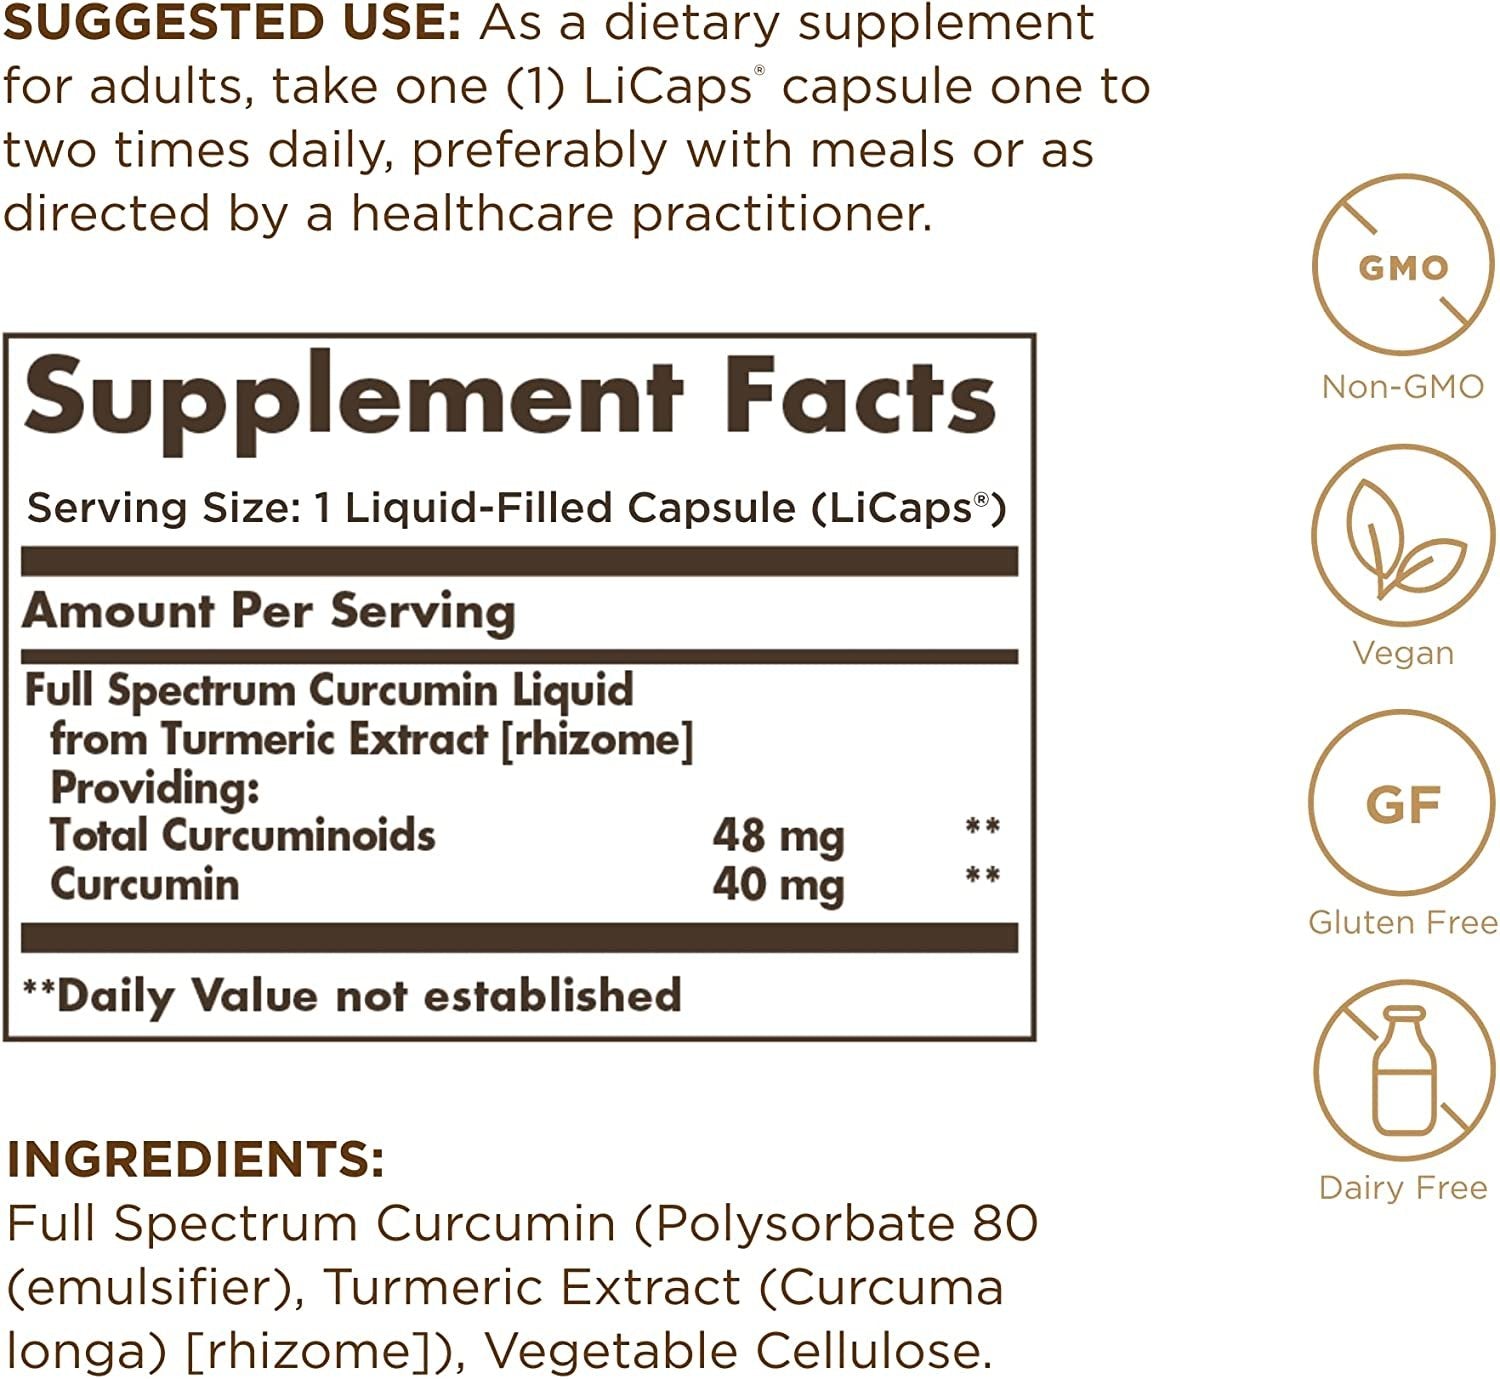 Solgar Full Spectrum Curcumin Liquid Extract, 30 Softgels - Faster Absorption - Brain, Joint & Immune Health - Long Lasting Support - Gluten Free, Non GMO, Dairy Free, Soy Free - 30 Servings